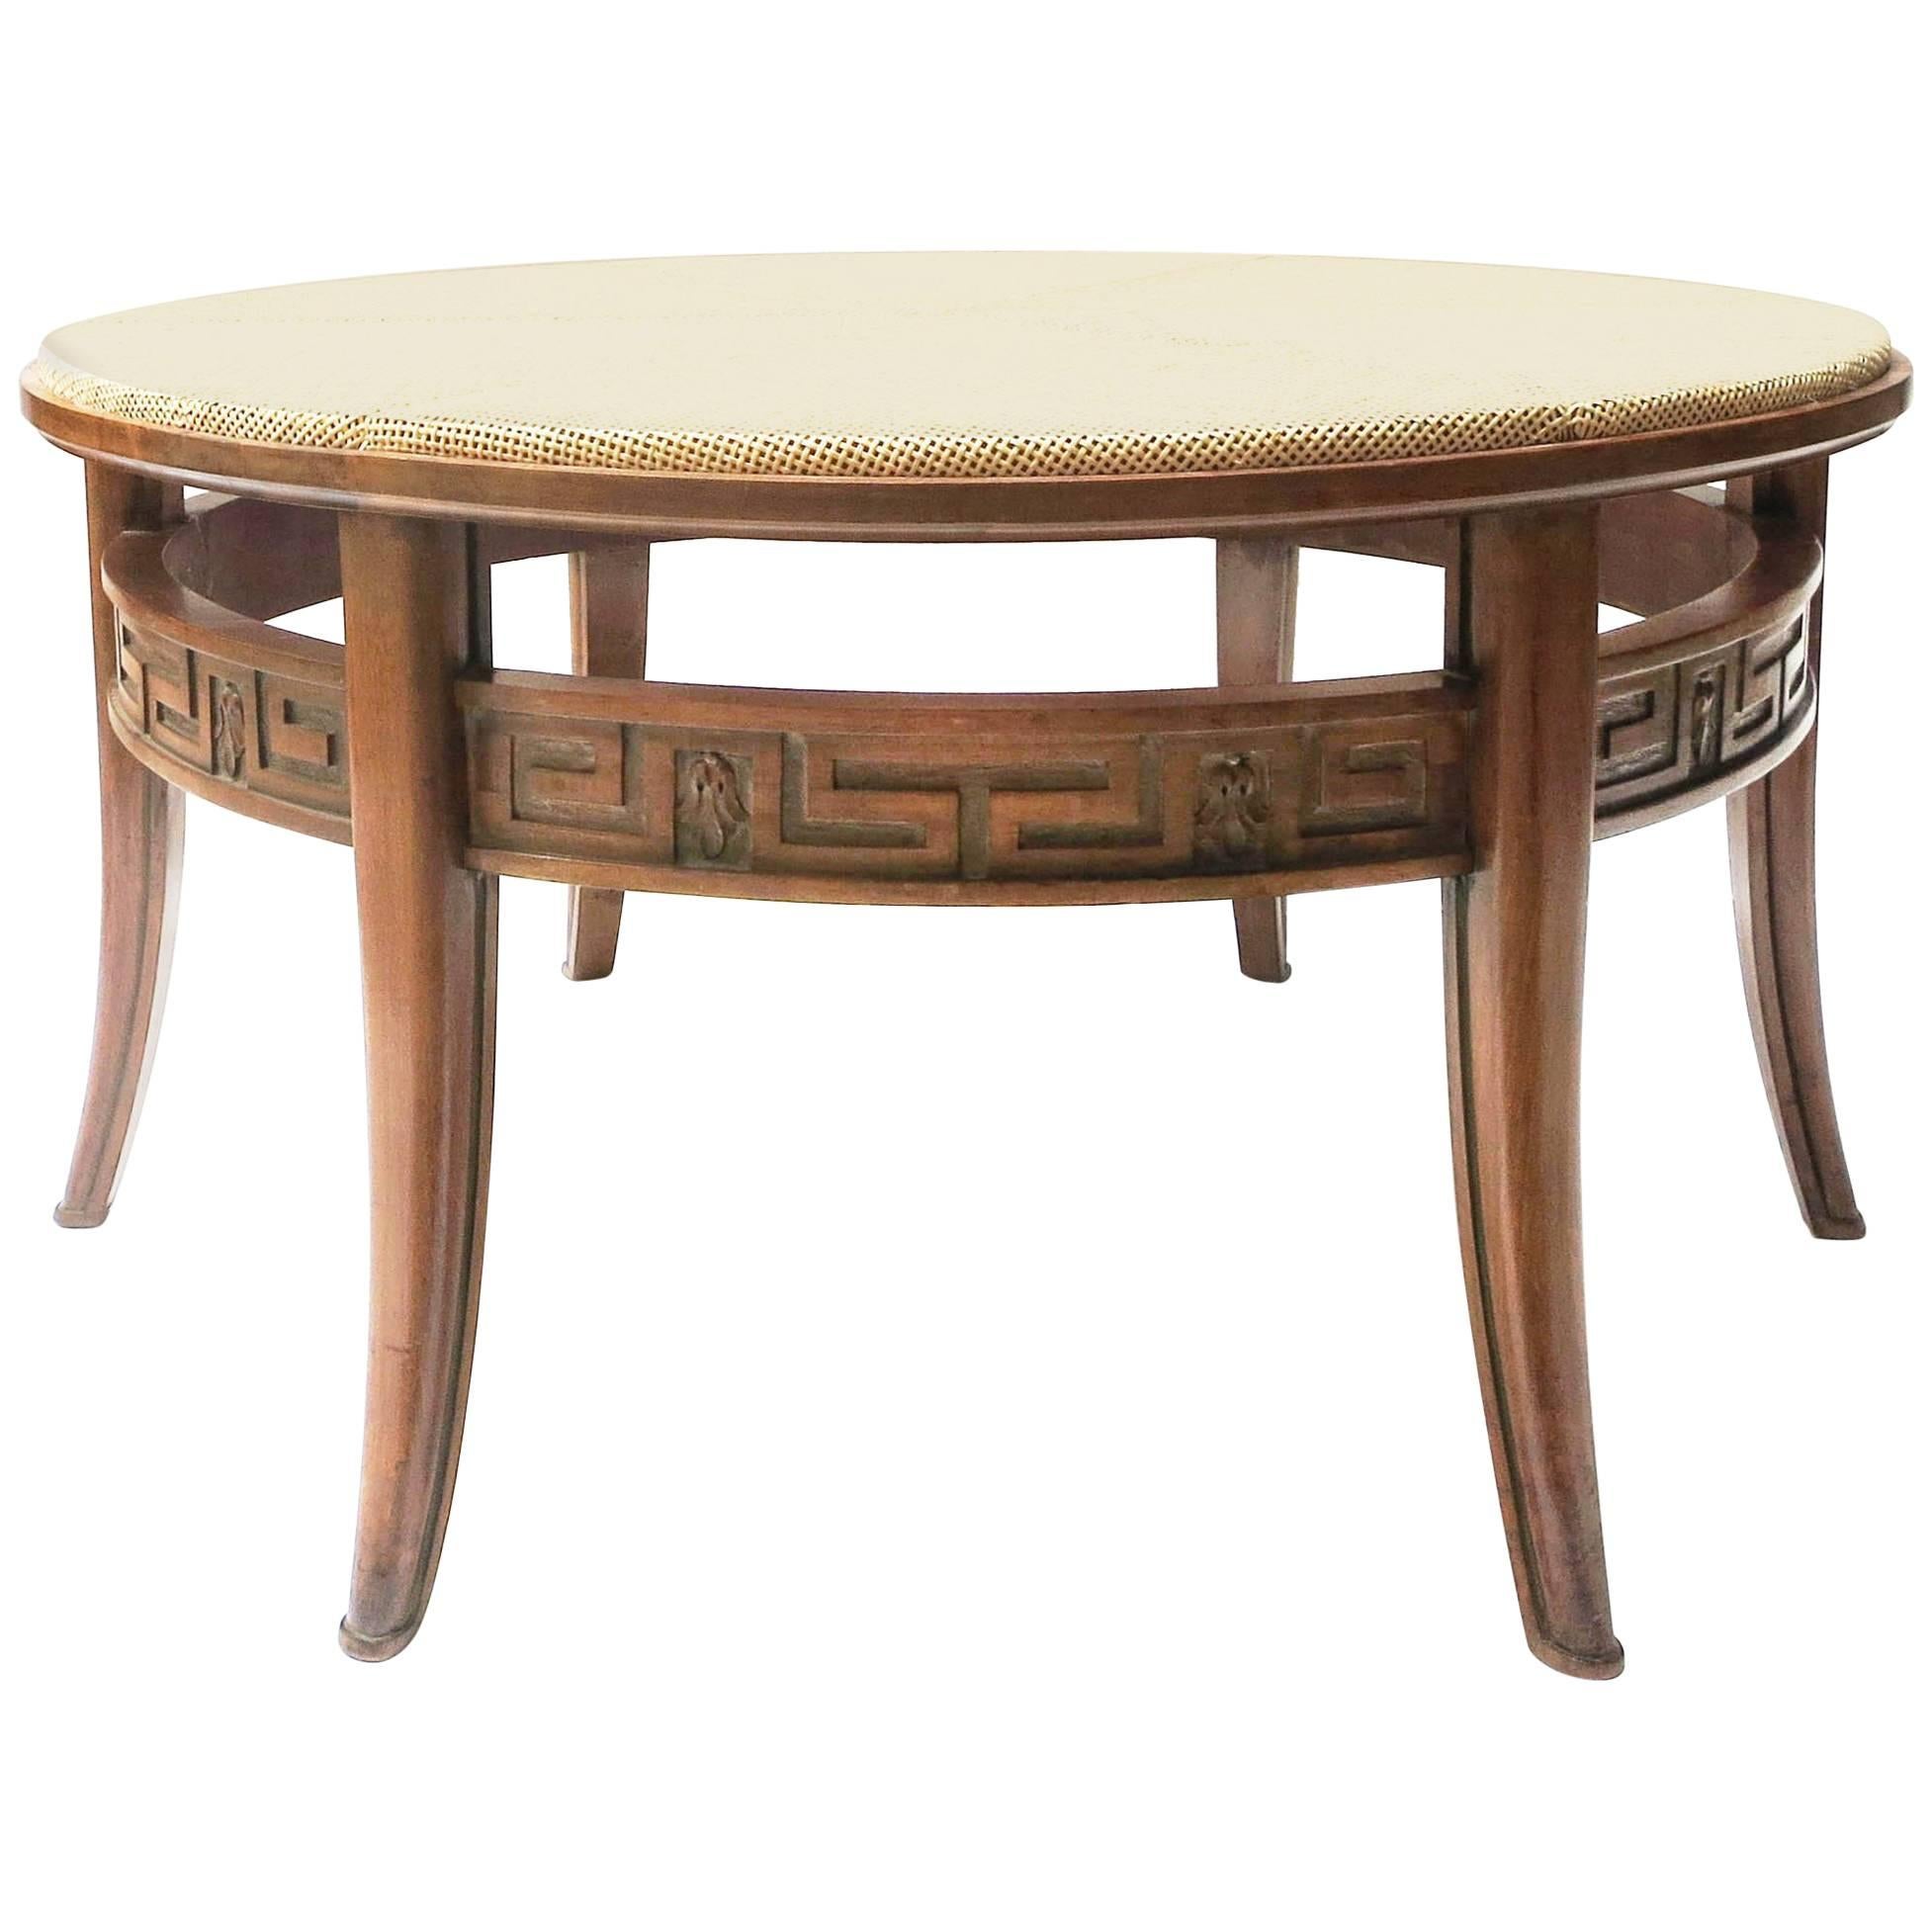 Swedish Round Coffee Table with Cane Top, 1940s For Sale